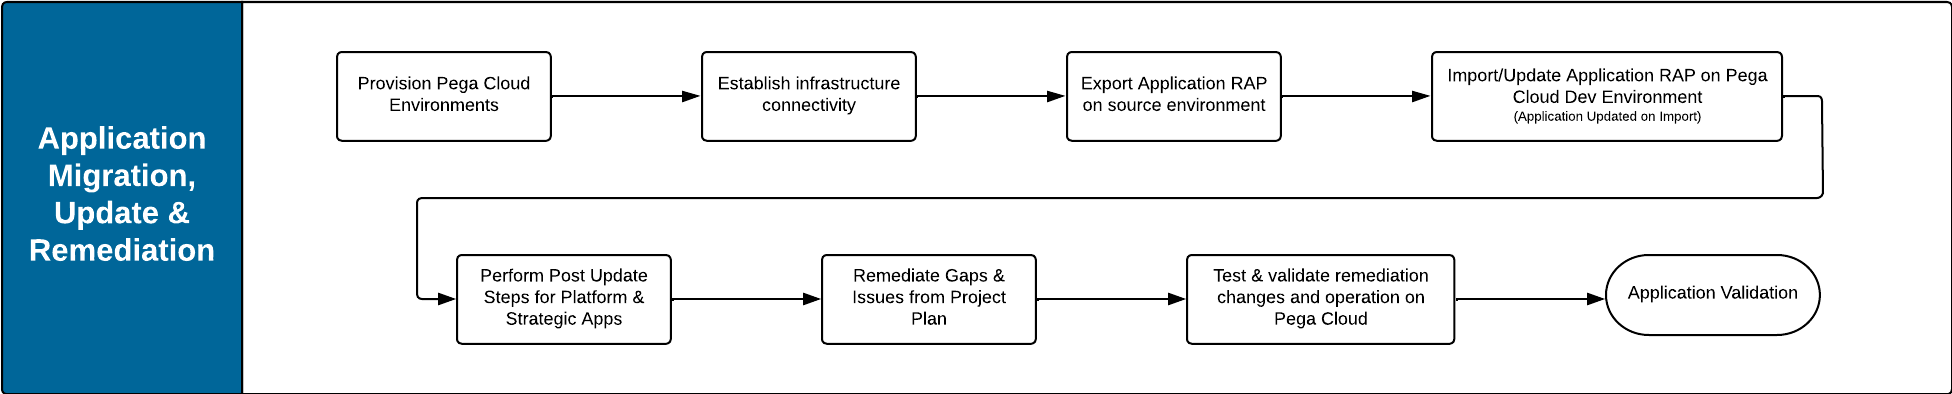 flow diagram of migration and remediation